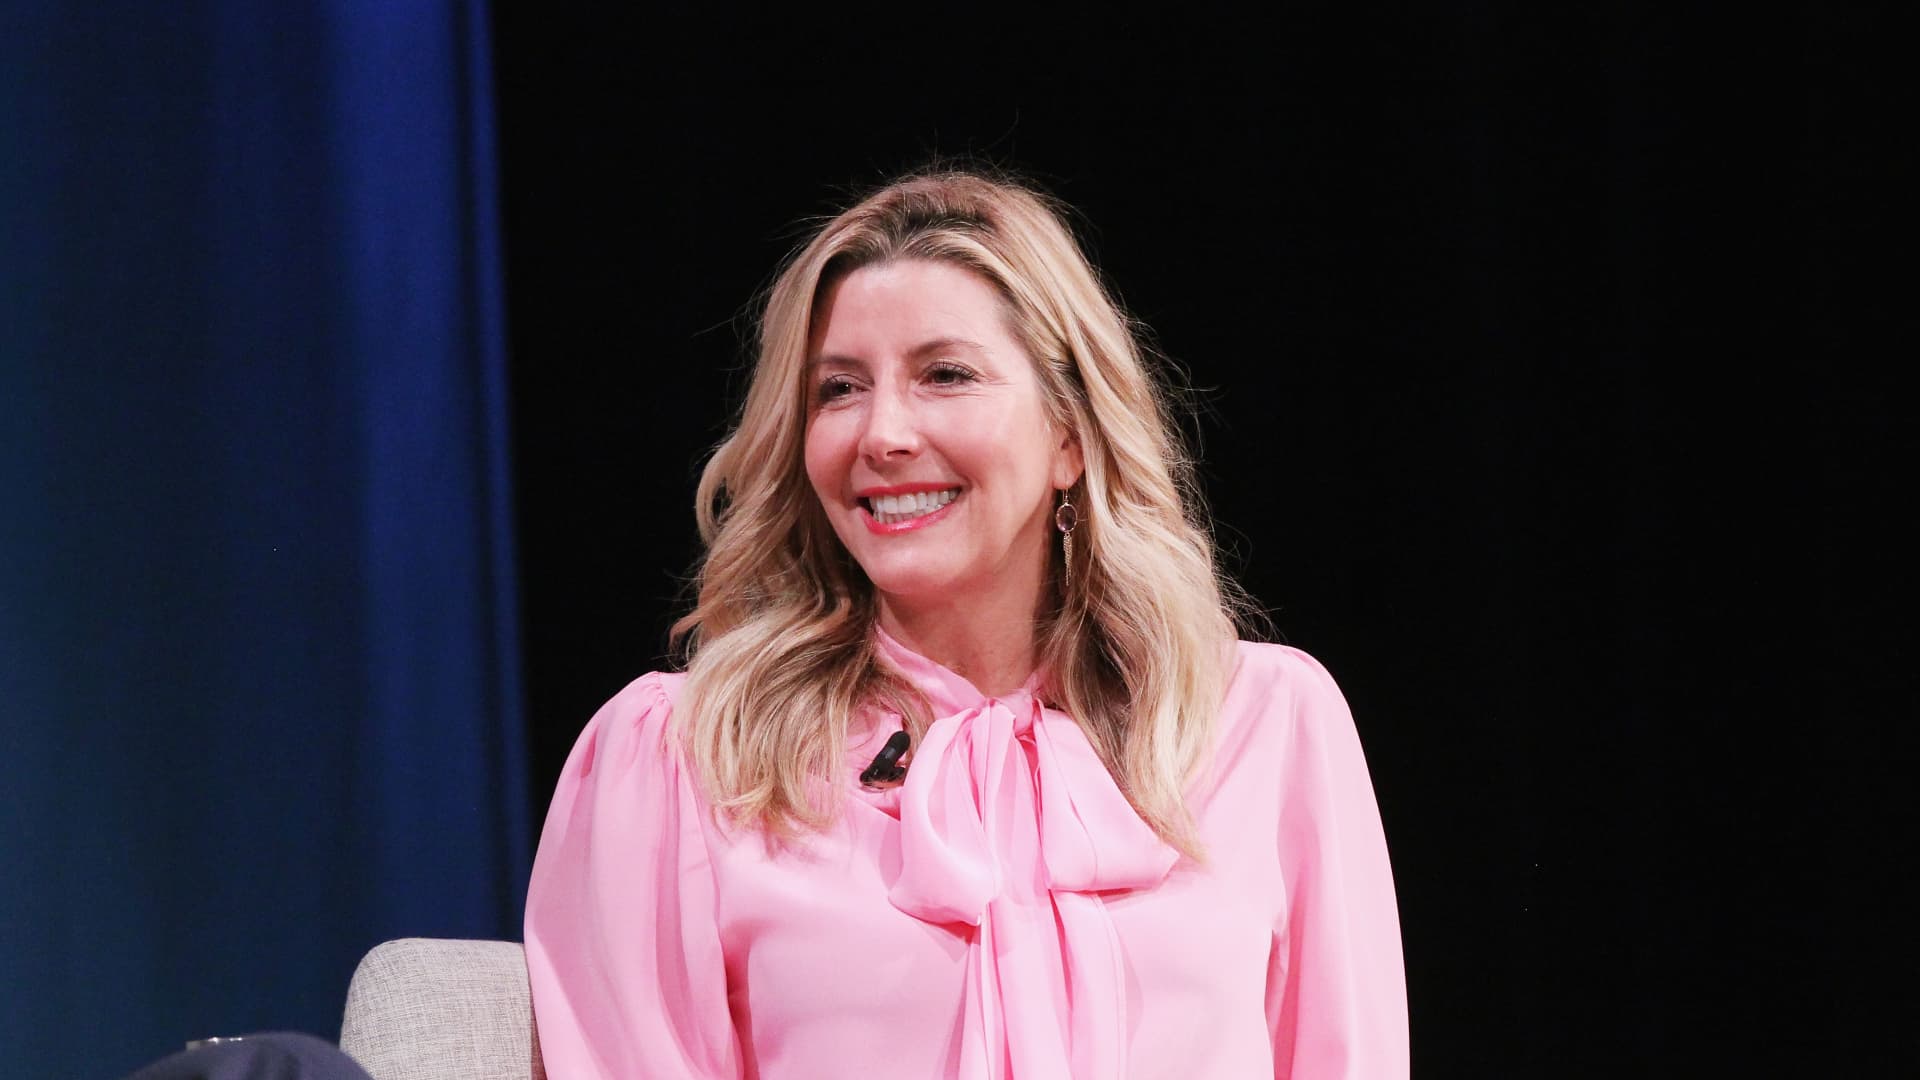 Sara Blakely on founding SPANX, smarter thinking and taking risks